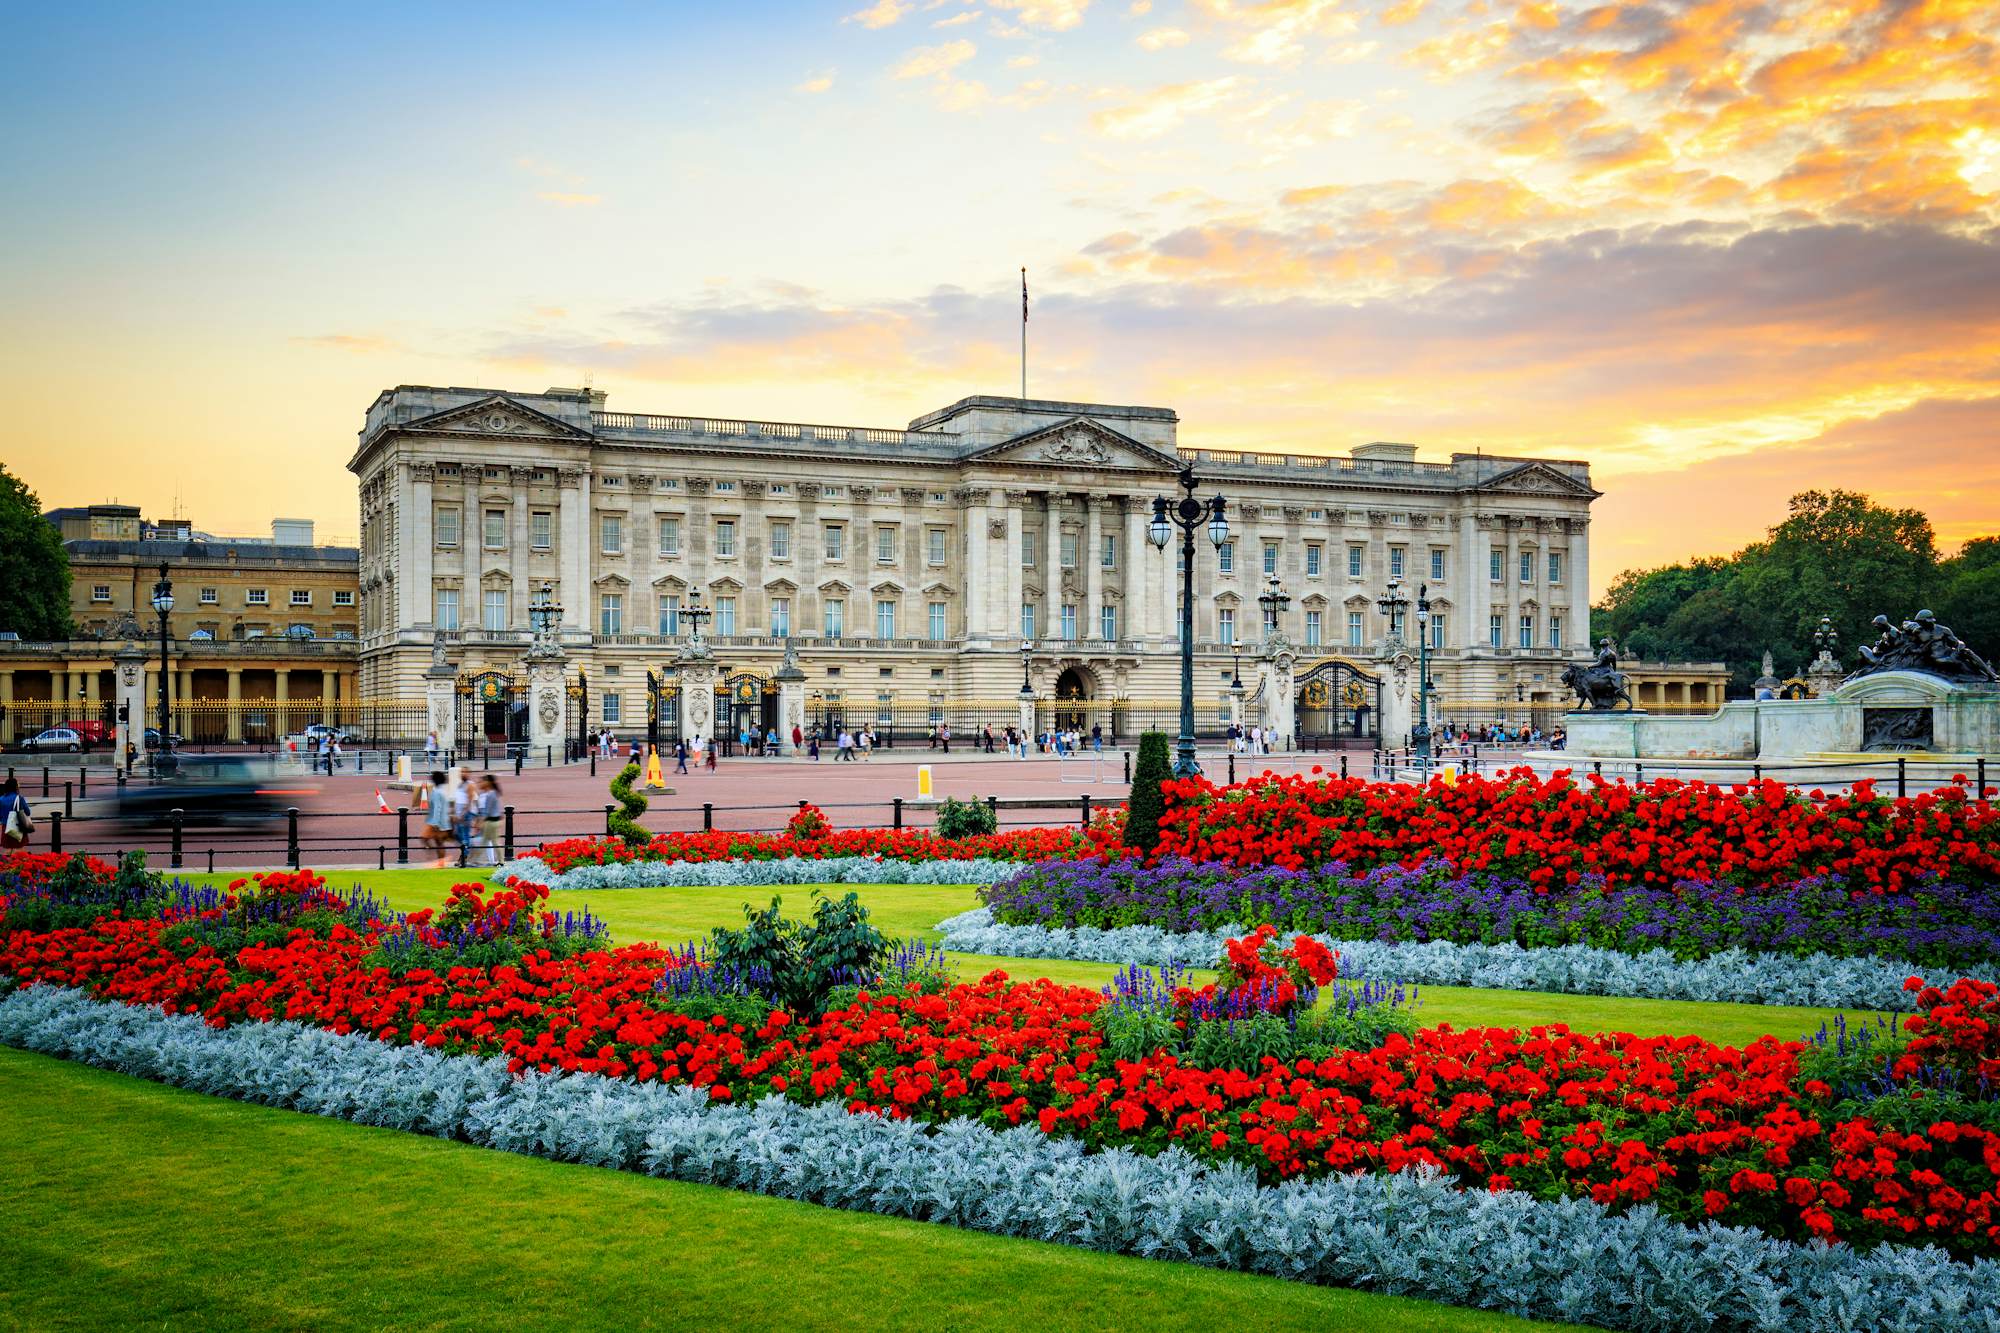 tours of royal palaces in london